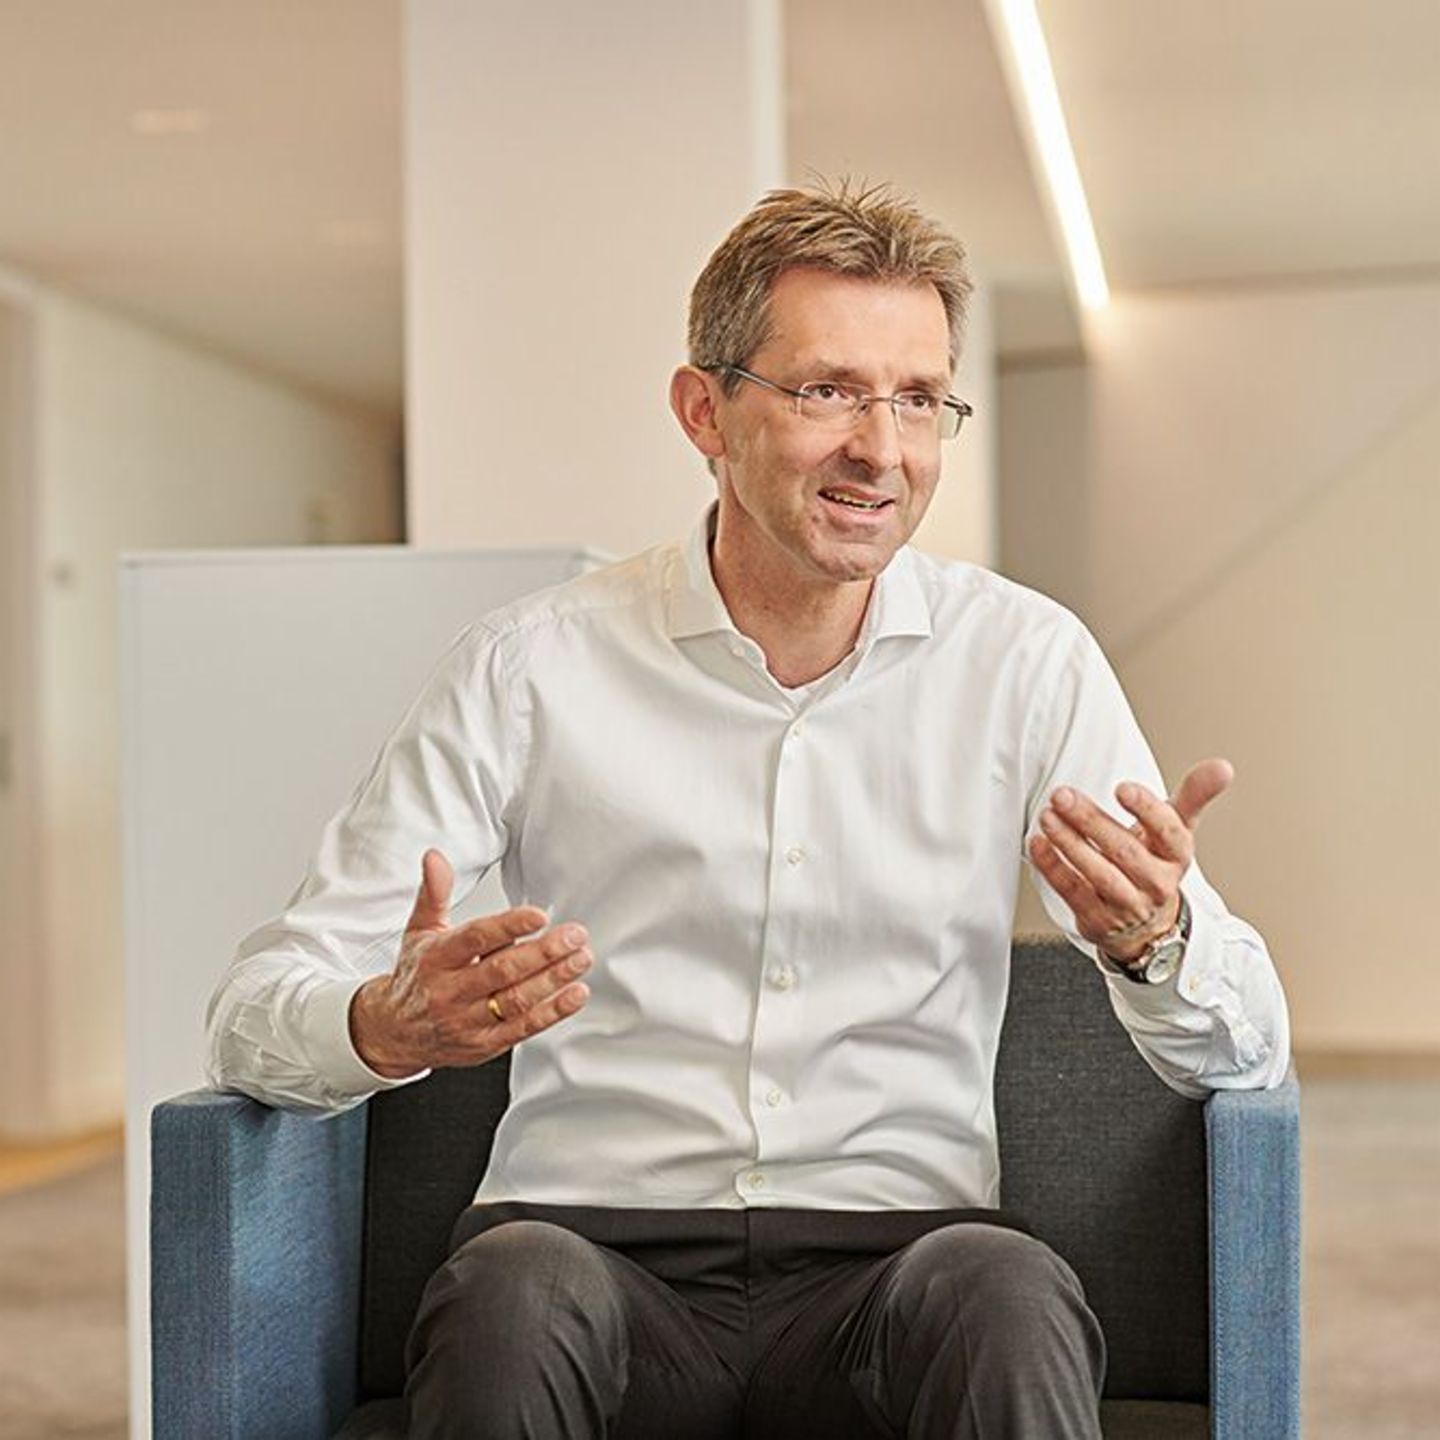 Justus Hecking-Veltman, Member of the EOS Group Board of Directors and CFO